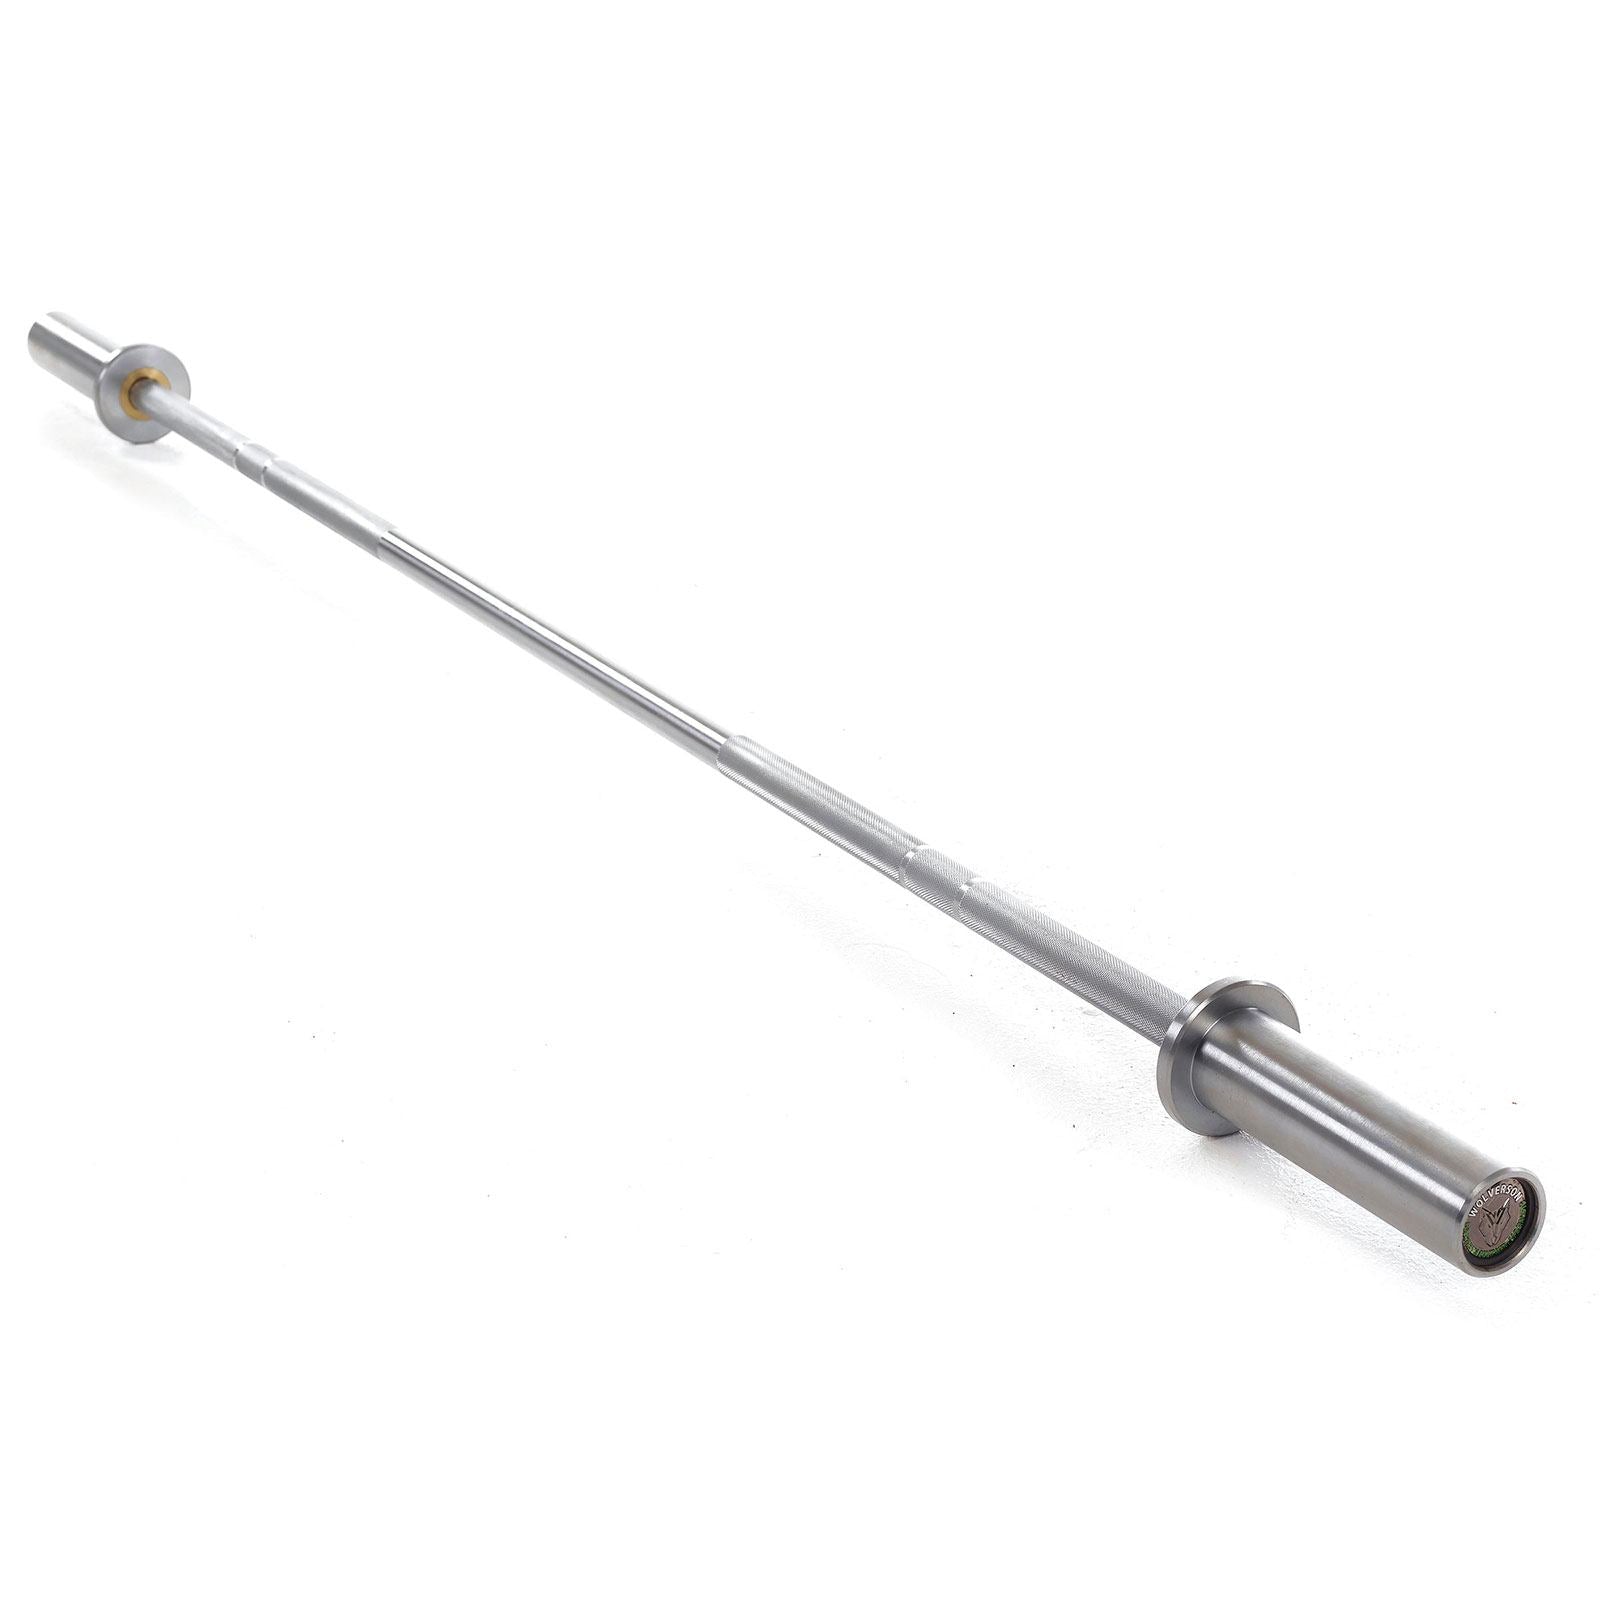 Wolverson 10kg Junior Technique Olympic Weight Lifting Bar